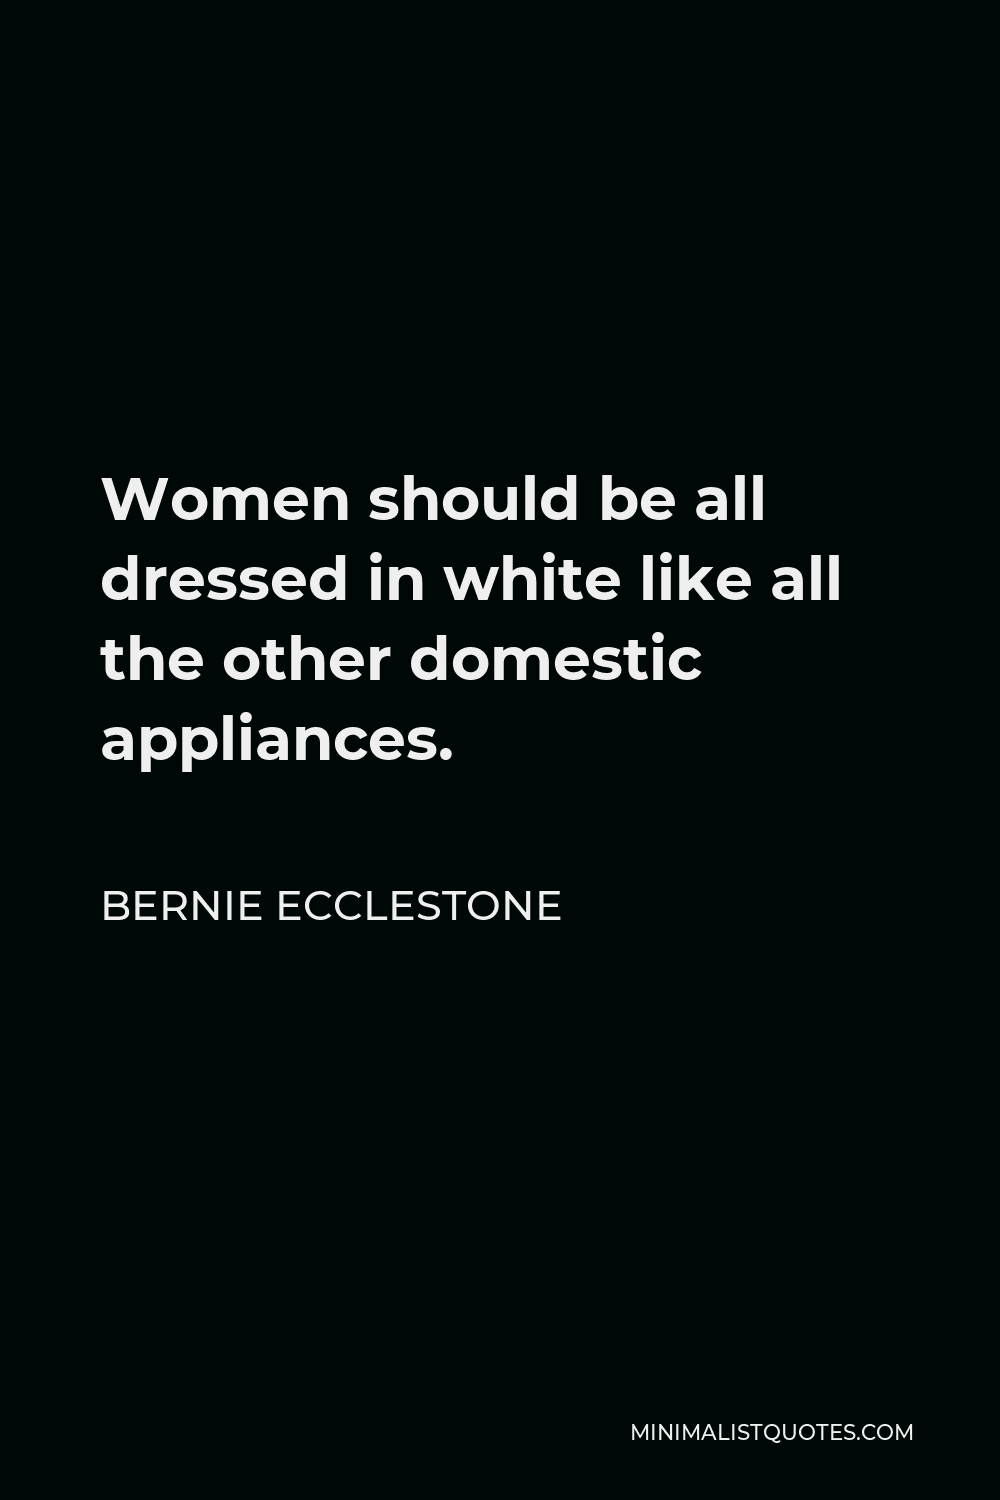 Bernie Ecclestone Quote - Women should be all dressed in white like all the other domestic appliances.